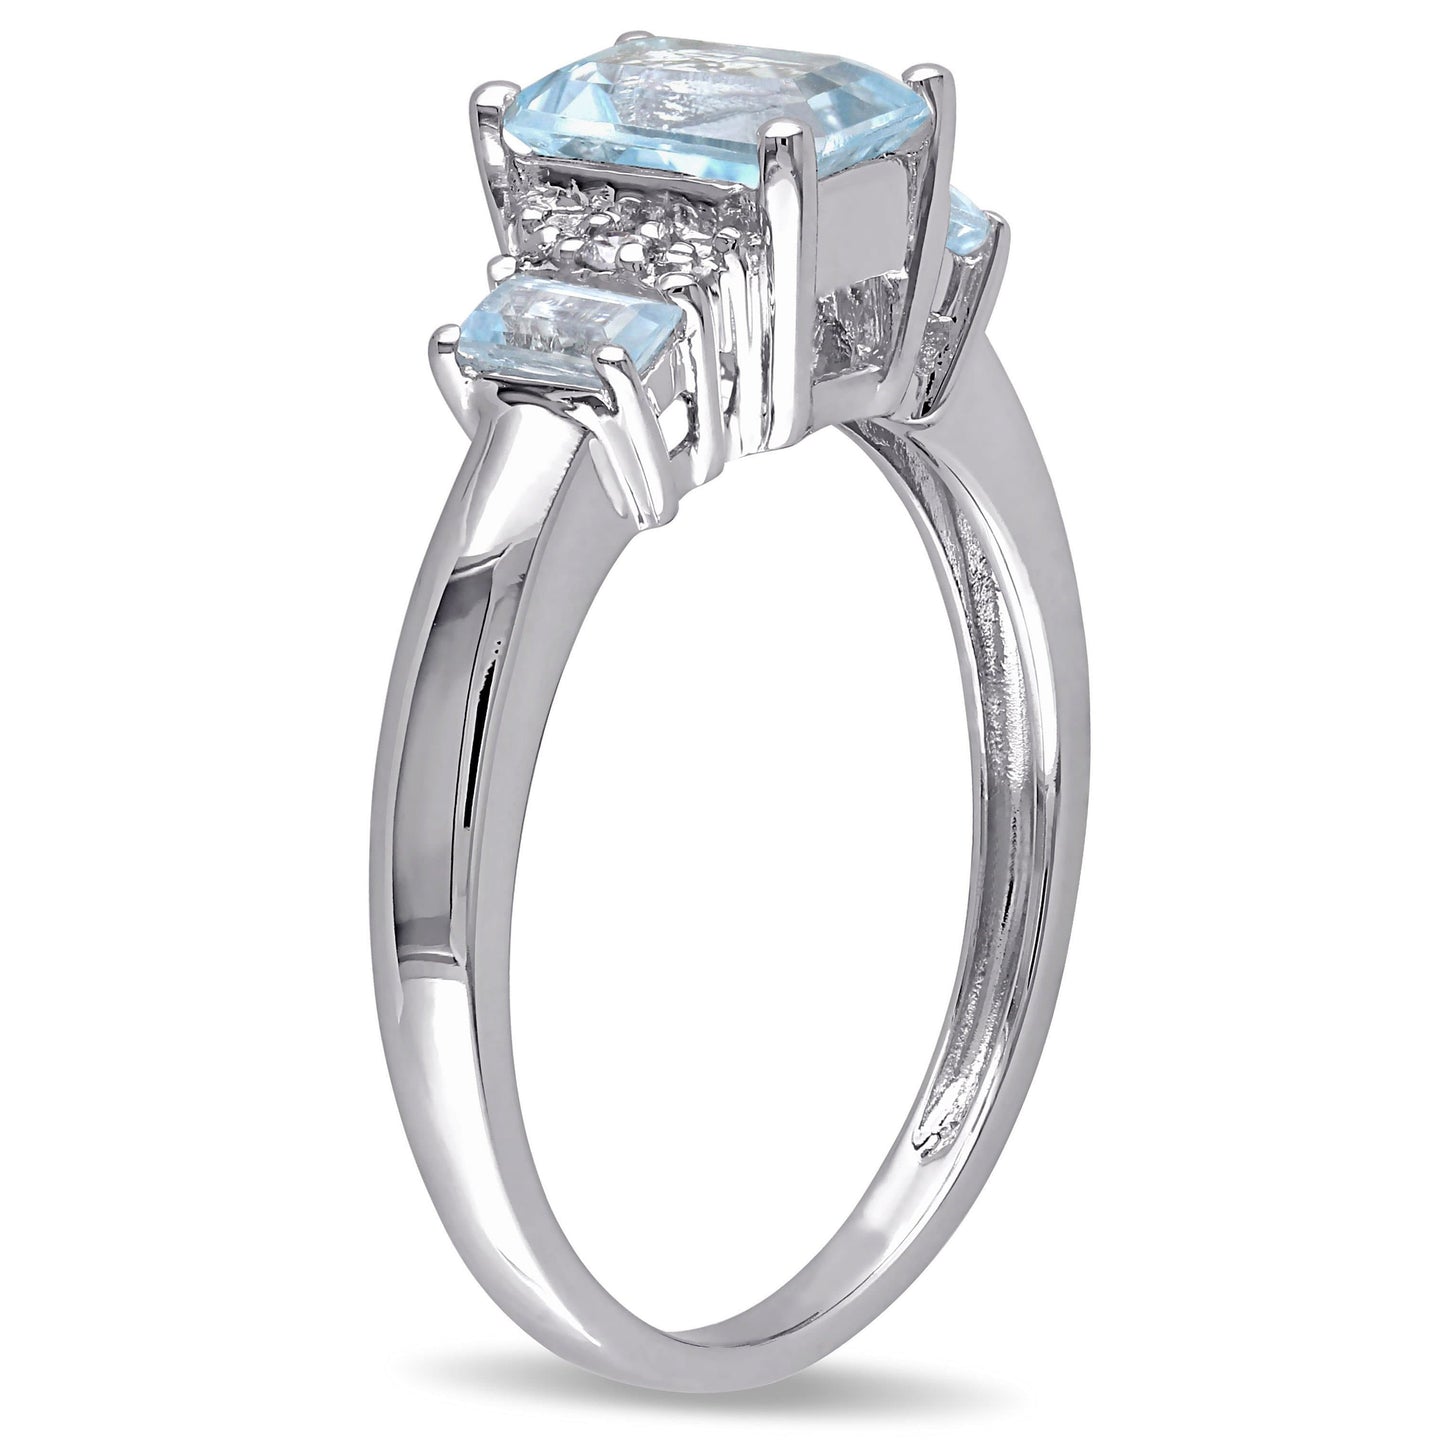 Sophia B 1 1/2ct Blue Topaz Ring with Diamond Accents